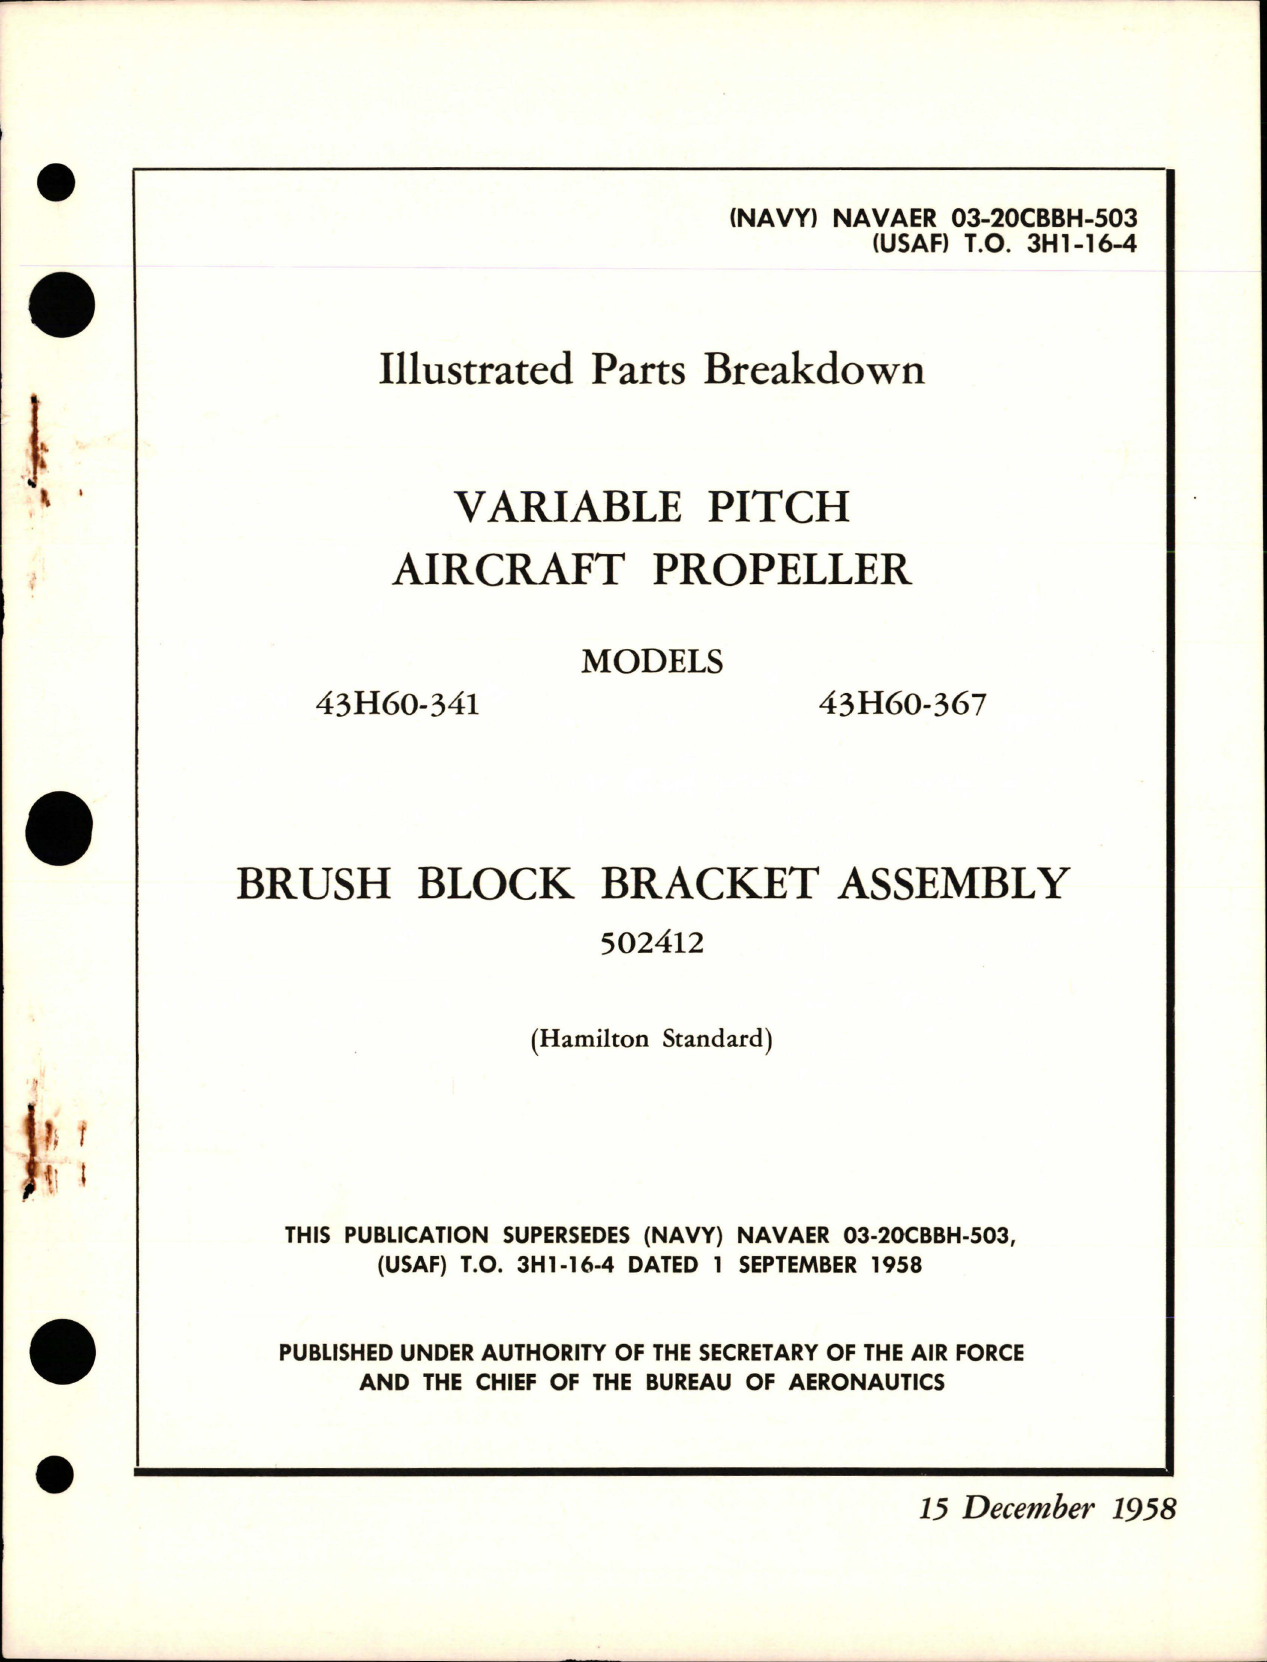 Sample page 1 from AirCorps Library document: Illustrated Parts Breakdown for Variable Pitch Propeller and Brush Block Bracket Assembly 